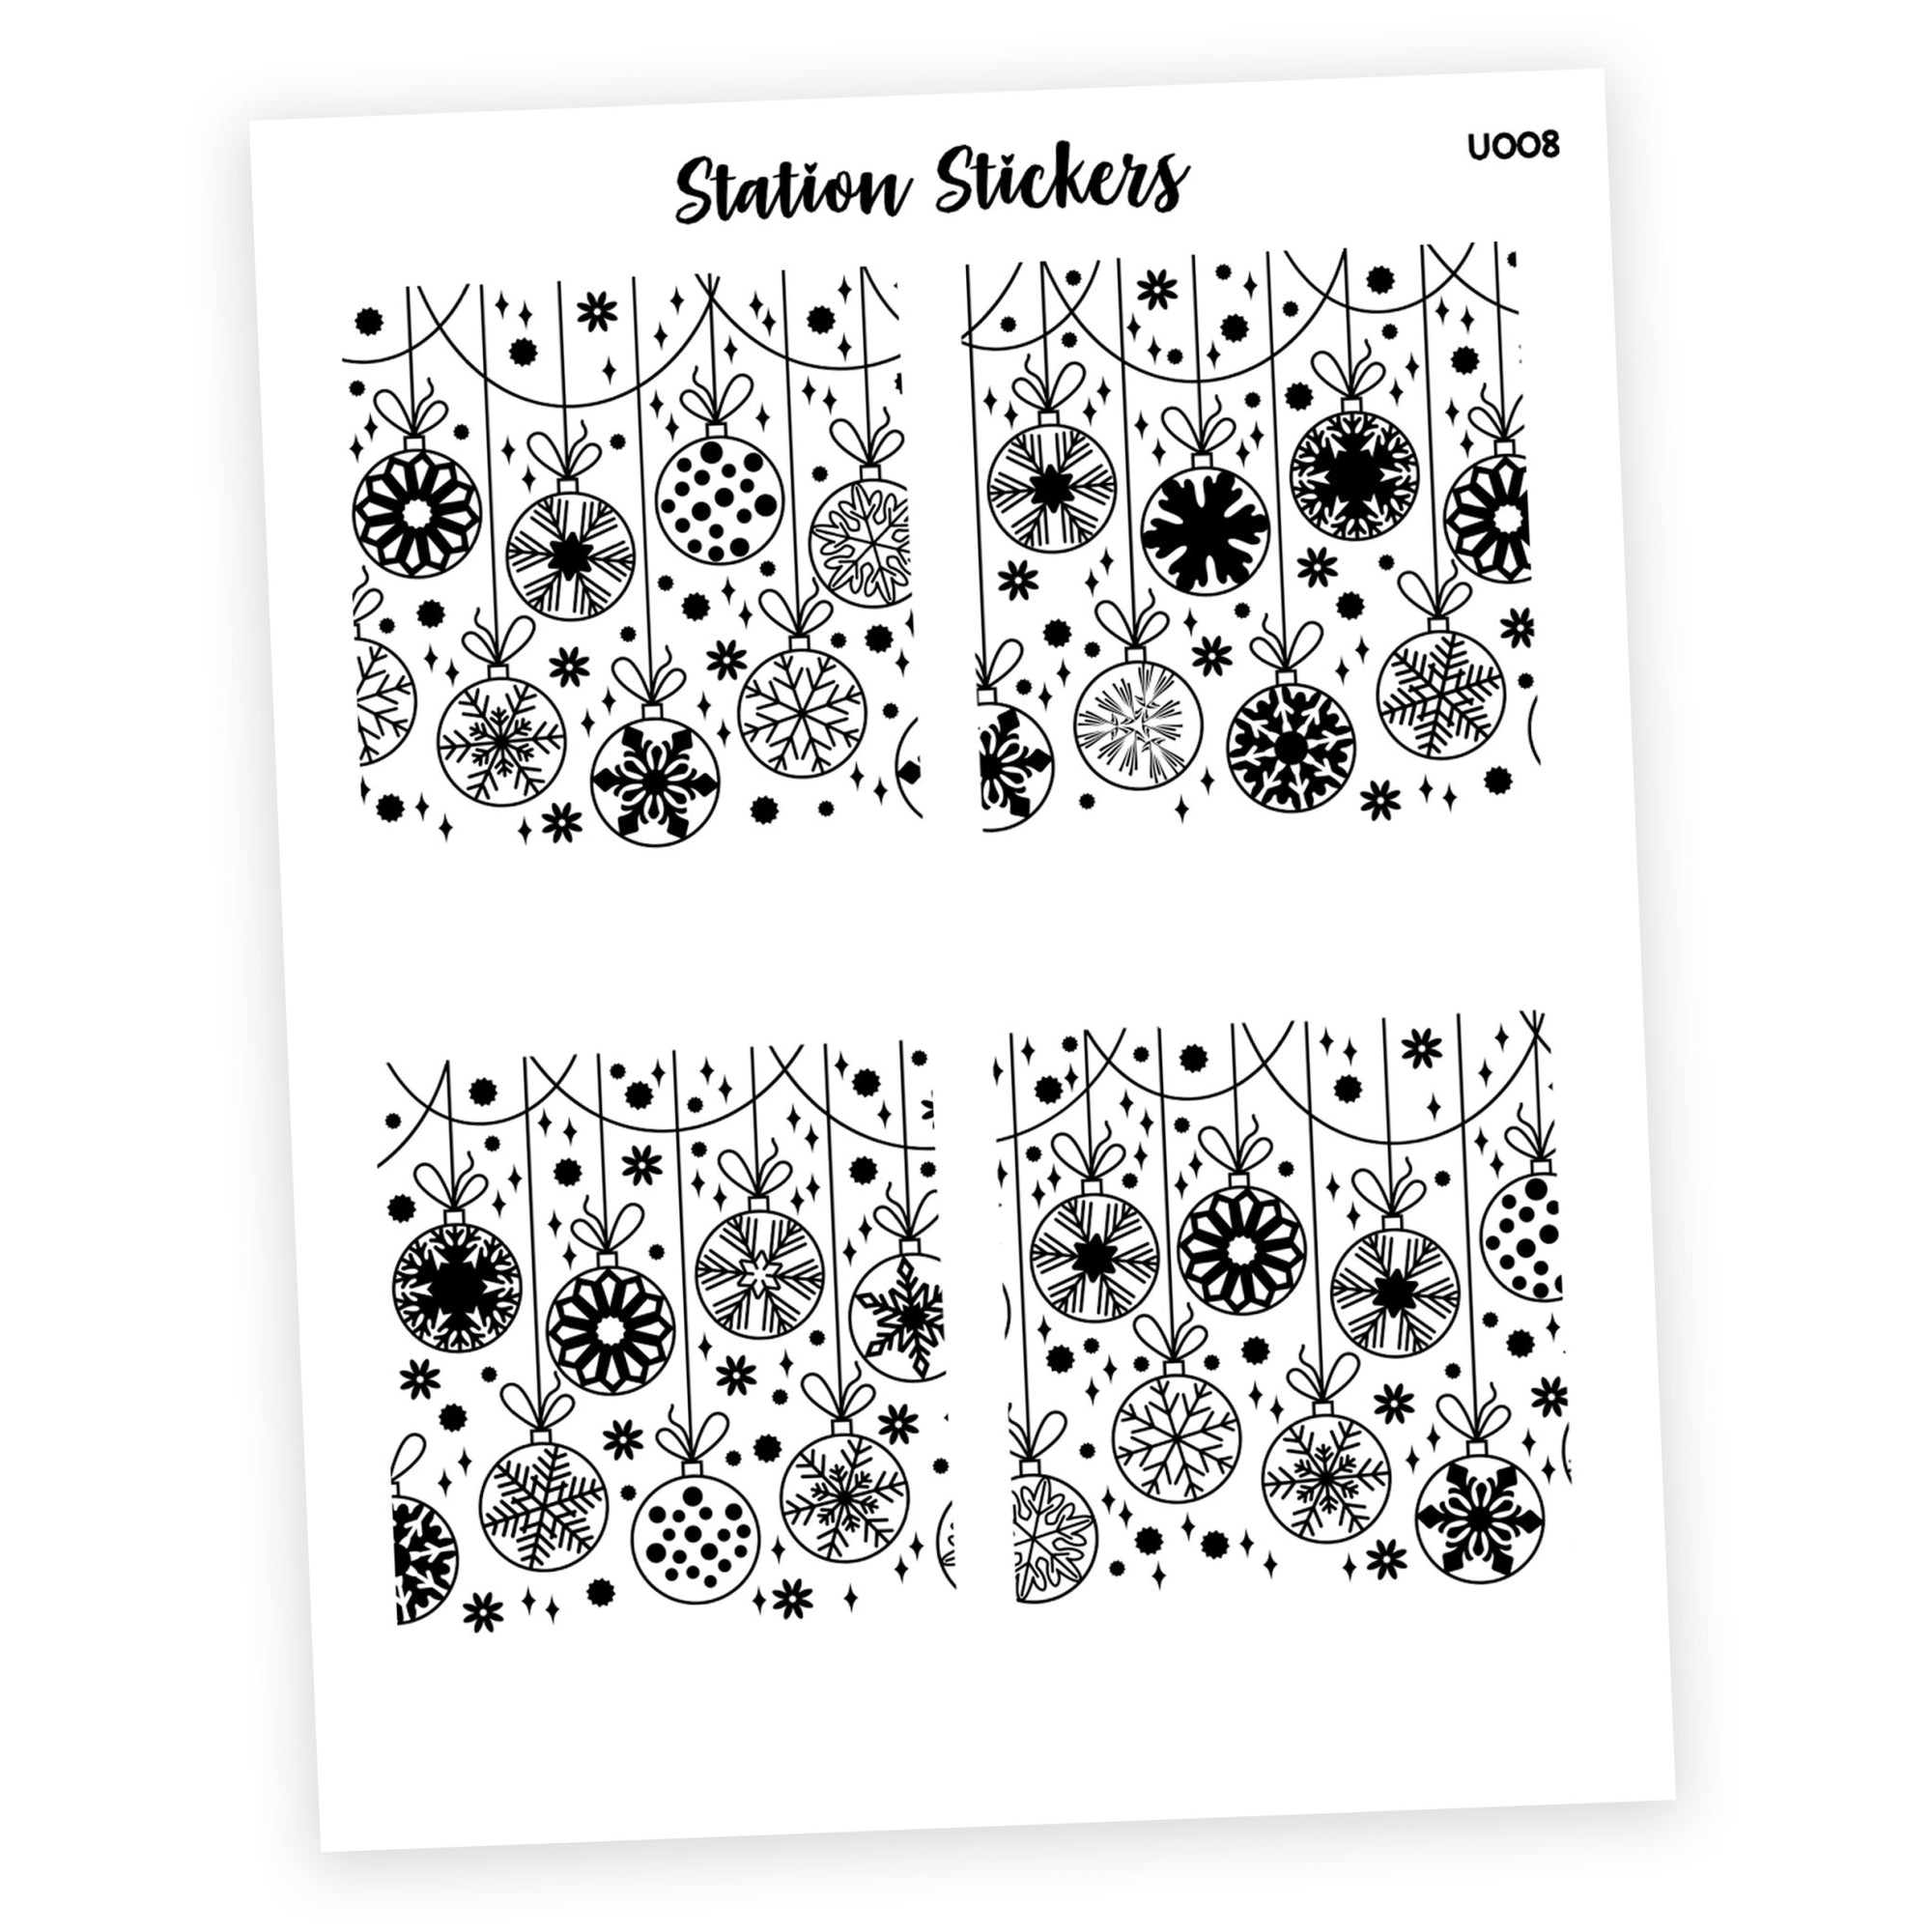 OVERLAY FULL BOX • HOLIDAY #2 - Station Stickers